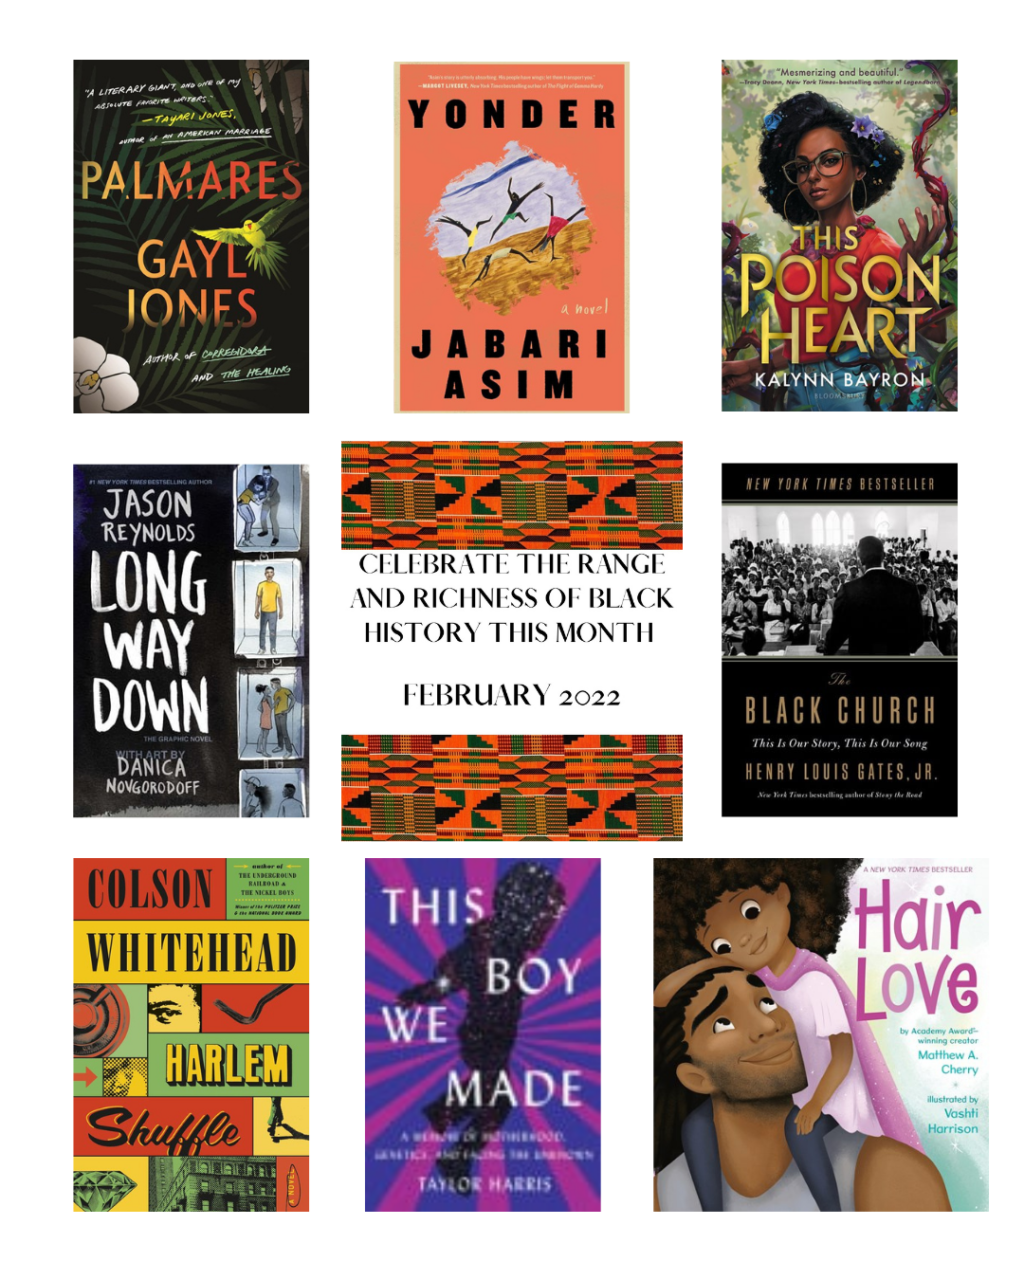 Grid highlighting books for Black History Month. "Celebrate the range and richness of Black history this month" and the featured books: Palmares by Gayl Jones,
Yonder by Jabari Asim,
This Poison Heart by Kalynn Bayron,
Long Way Down: The Graphic Novel by Jason Reynolds, Danica Novgorodoff (Illustrator),
The Black Church: This Is Our Story, This Is Our Song by Henry Louis Gates, Jr.,
Harlem Shuffle by Colson Whitehead,
This Boy We Made: A Memoir of Motherhood, Genetics, and Facing the Unknown by Taylor Harris, and
Hair Love by Matthew A. Cherry, Vashti Harrison (Illustrator)